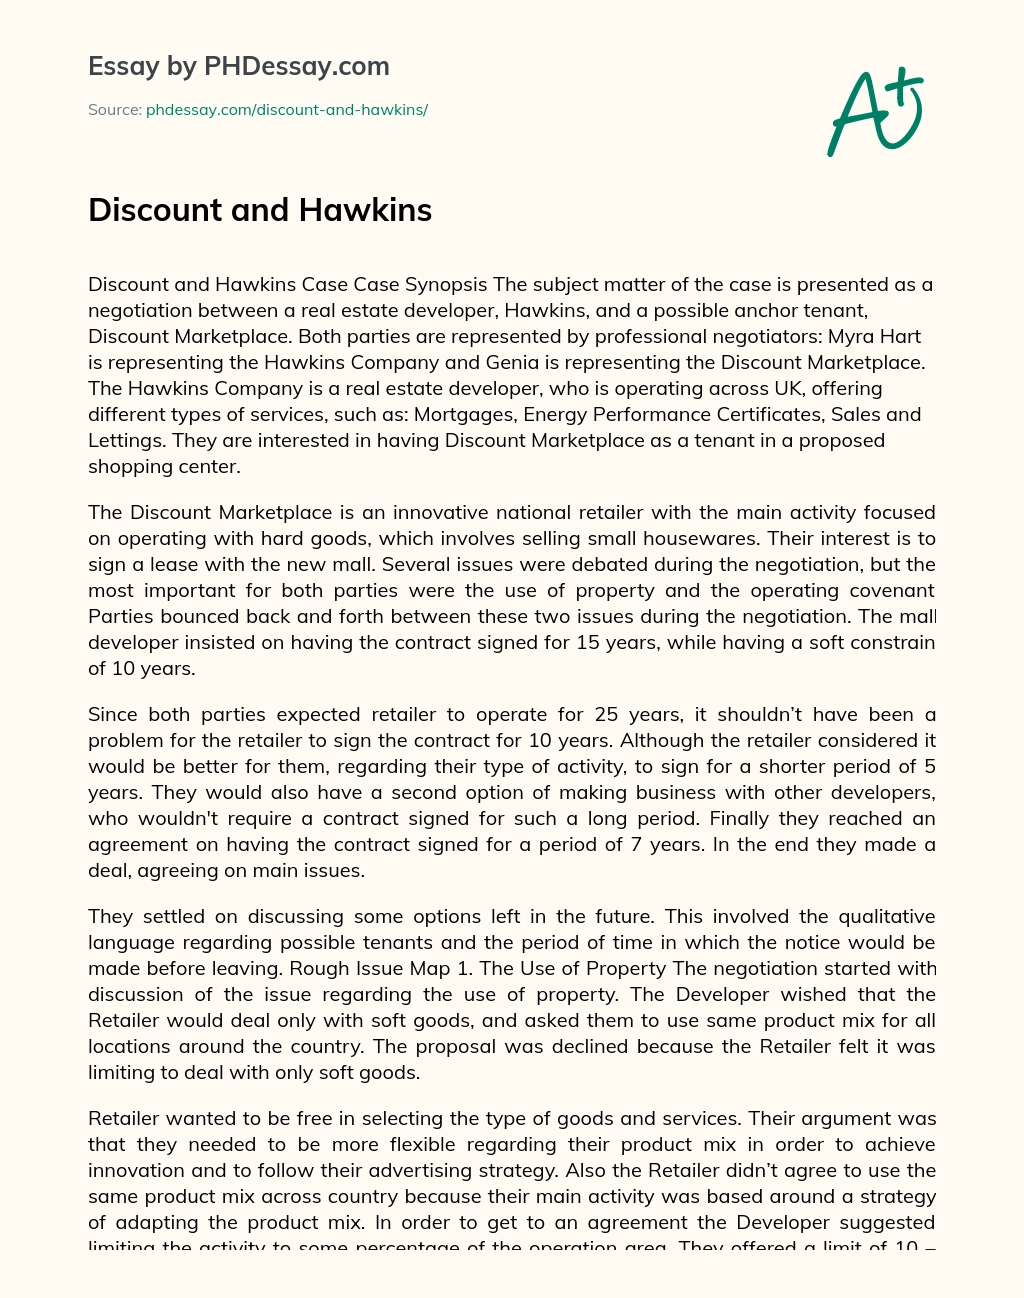 Discount and Hawkins essay